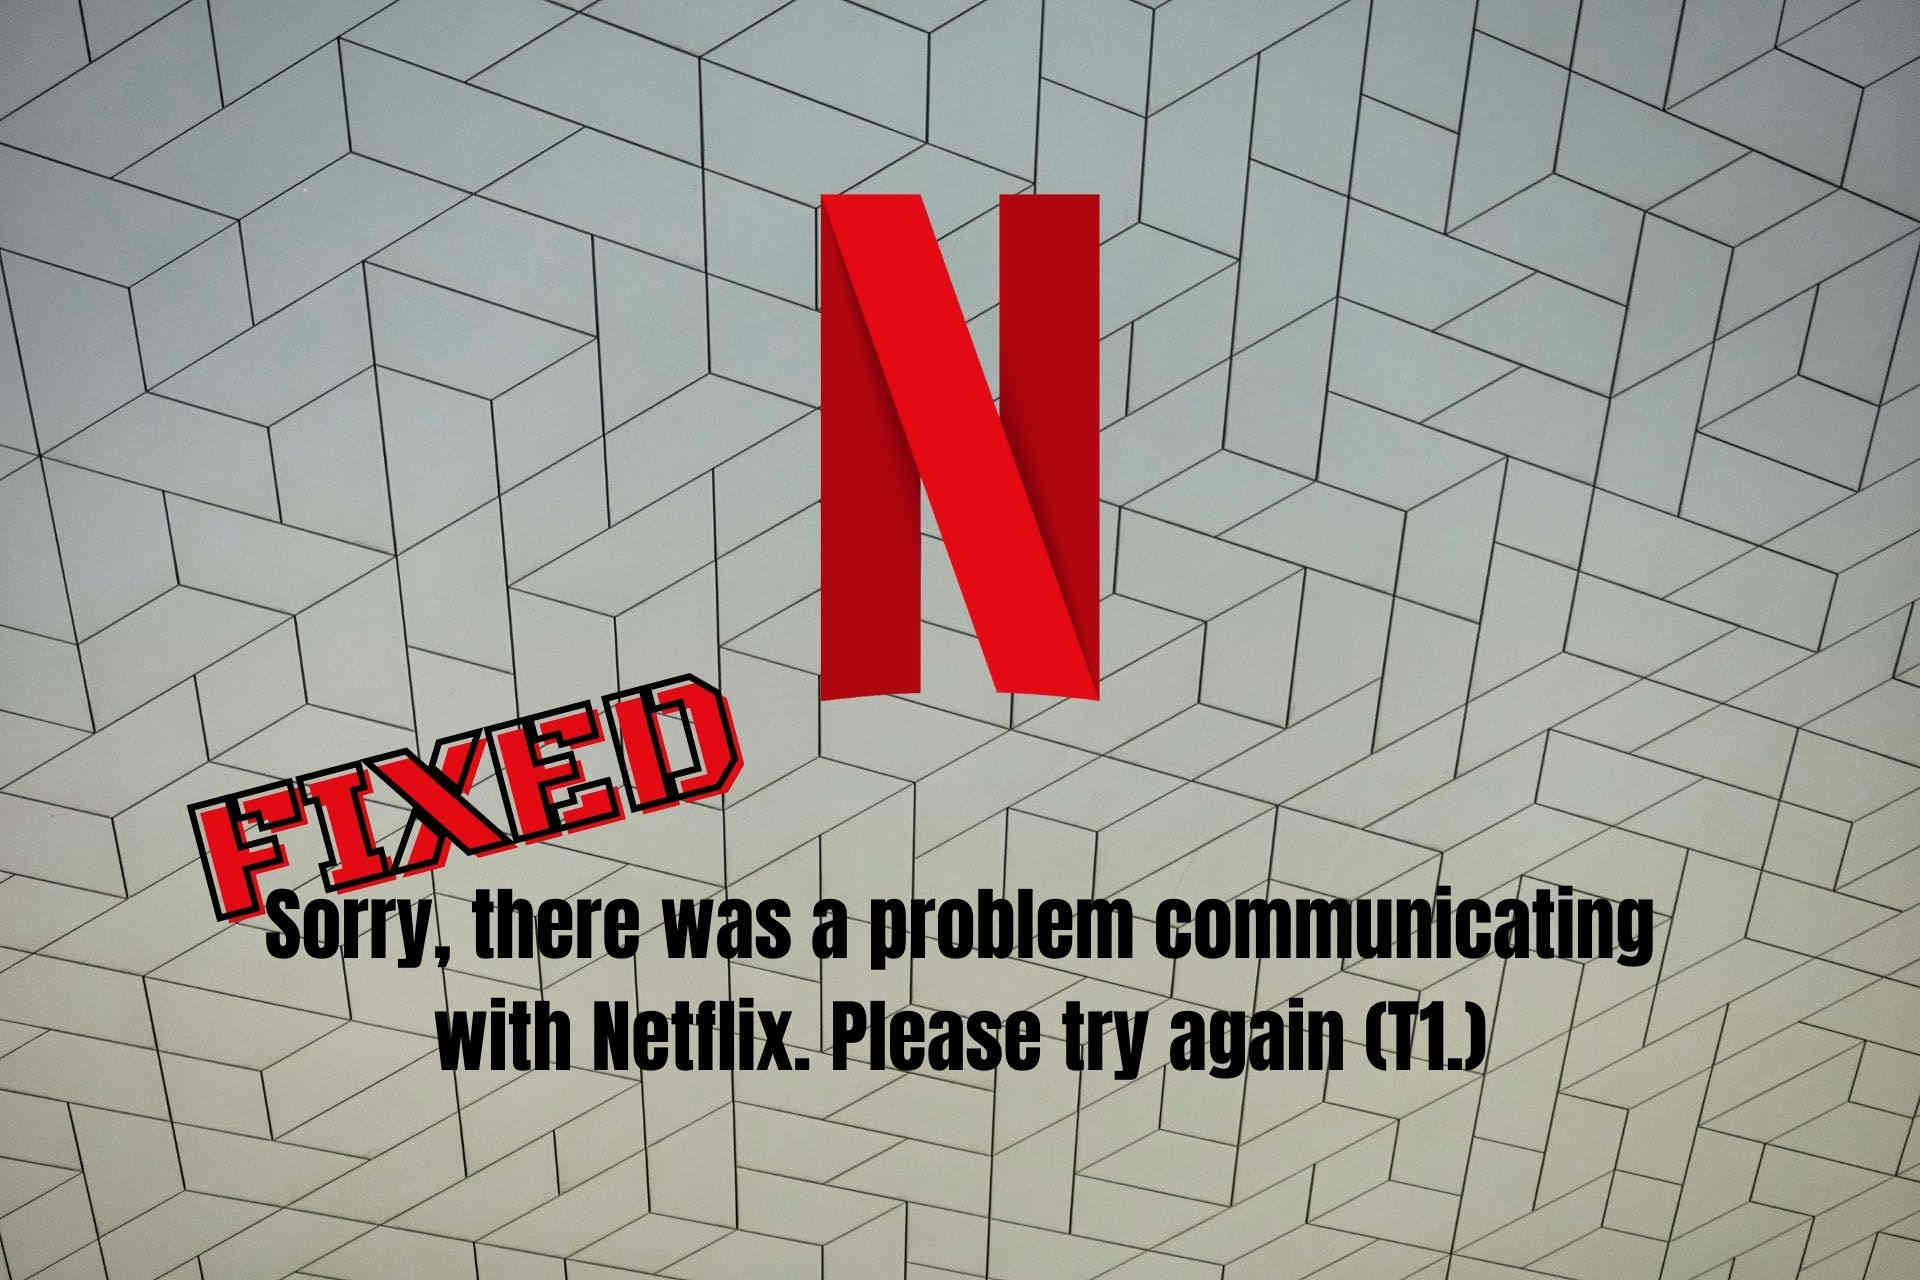 Fix: Sorry, there was a problem communicating with Netflix